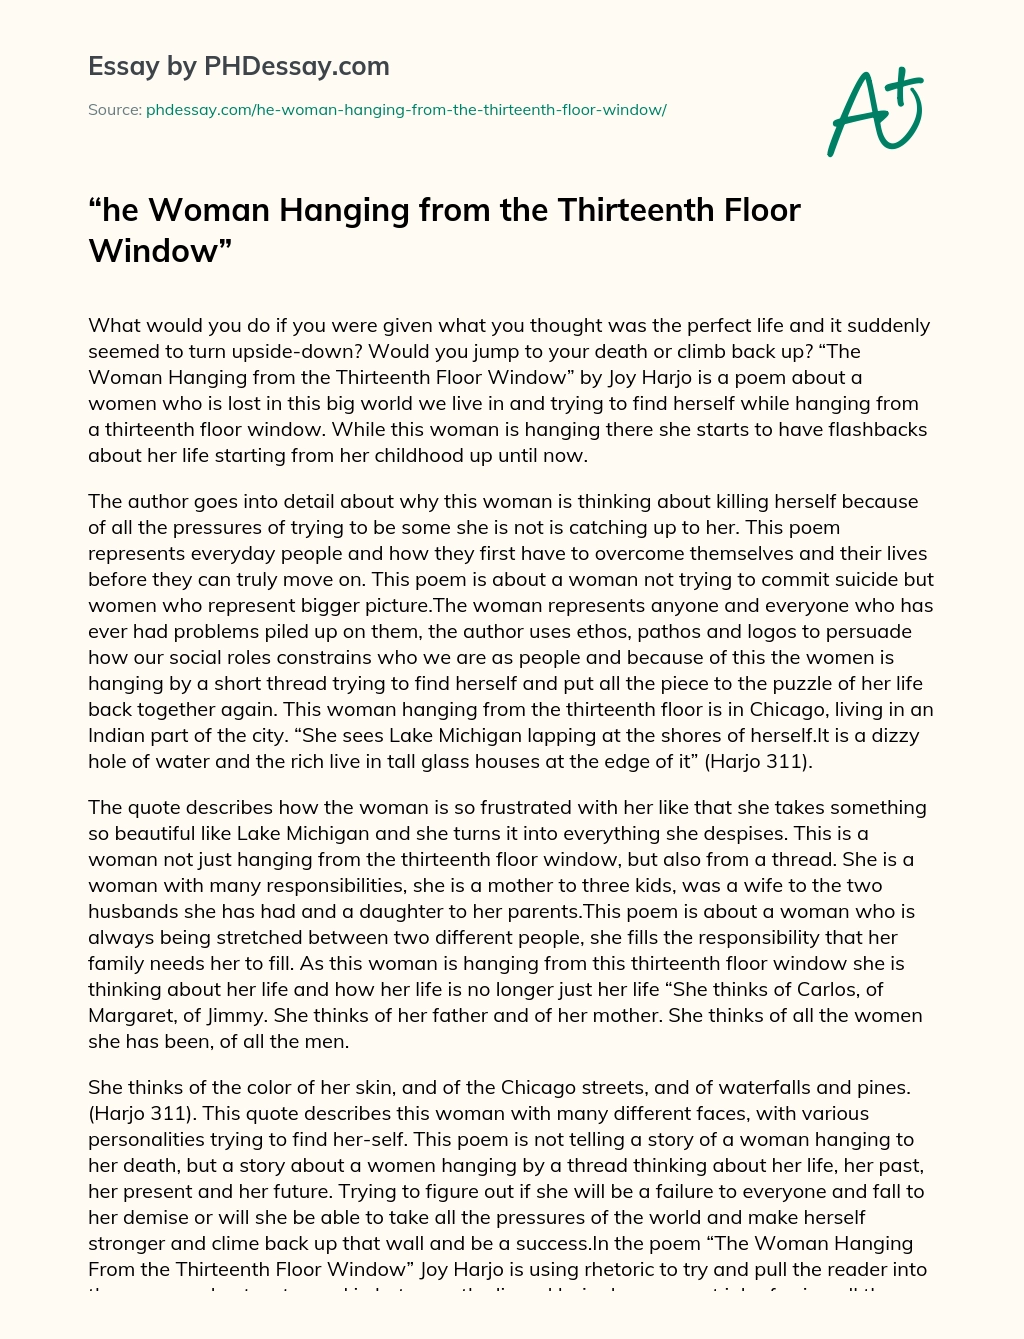 The Woman Hanging from the Thirteenth Floor Window essay